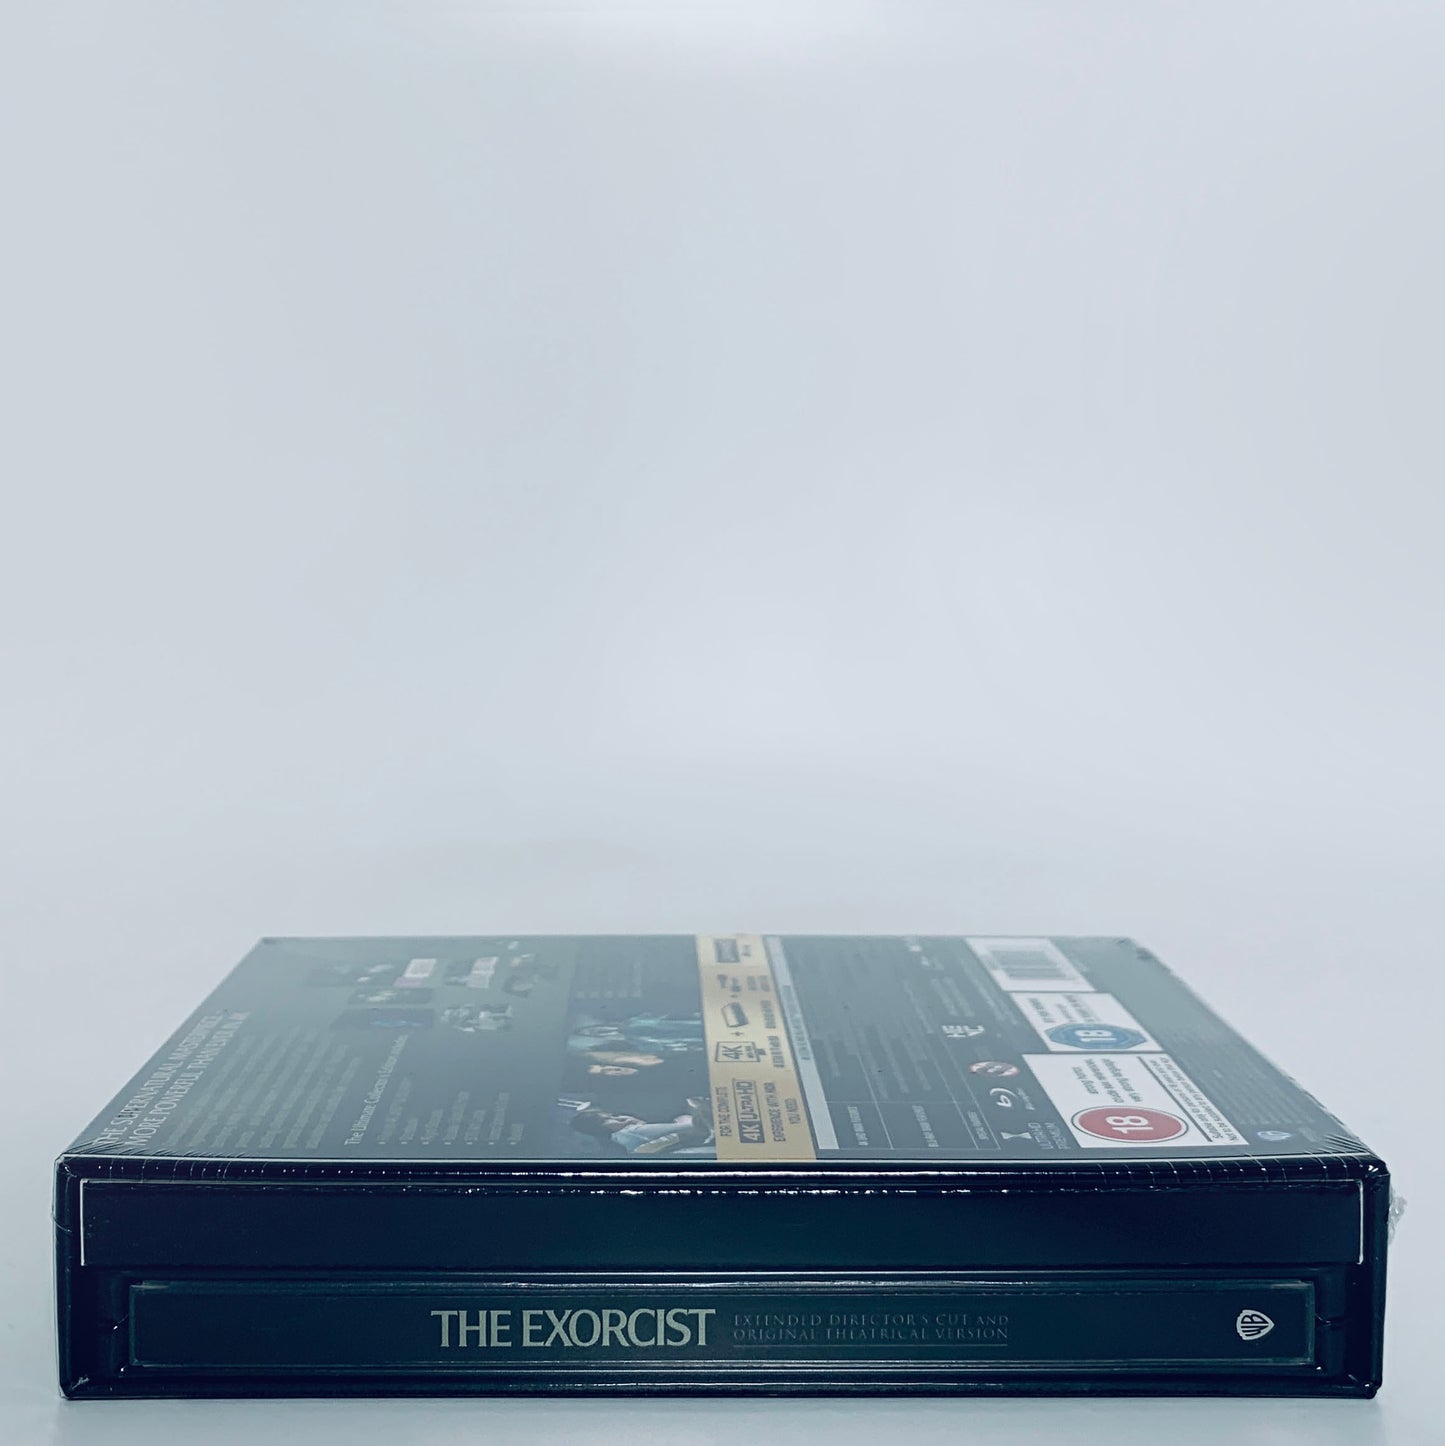 The Exorcist 5-Disc 4K Ultra HD Blu-ray SteelBook Warner Limited Edition Poster